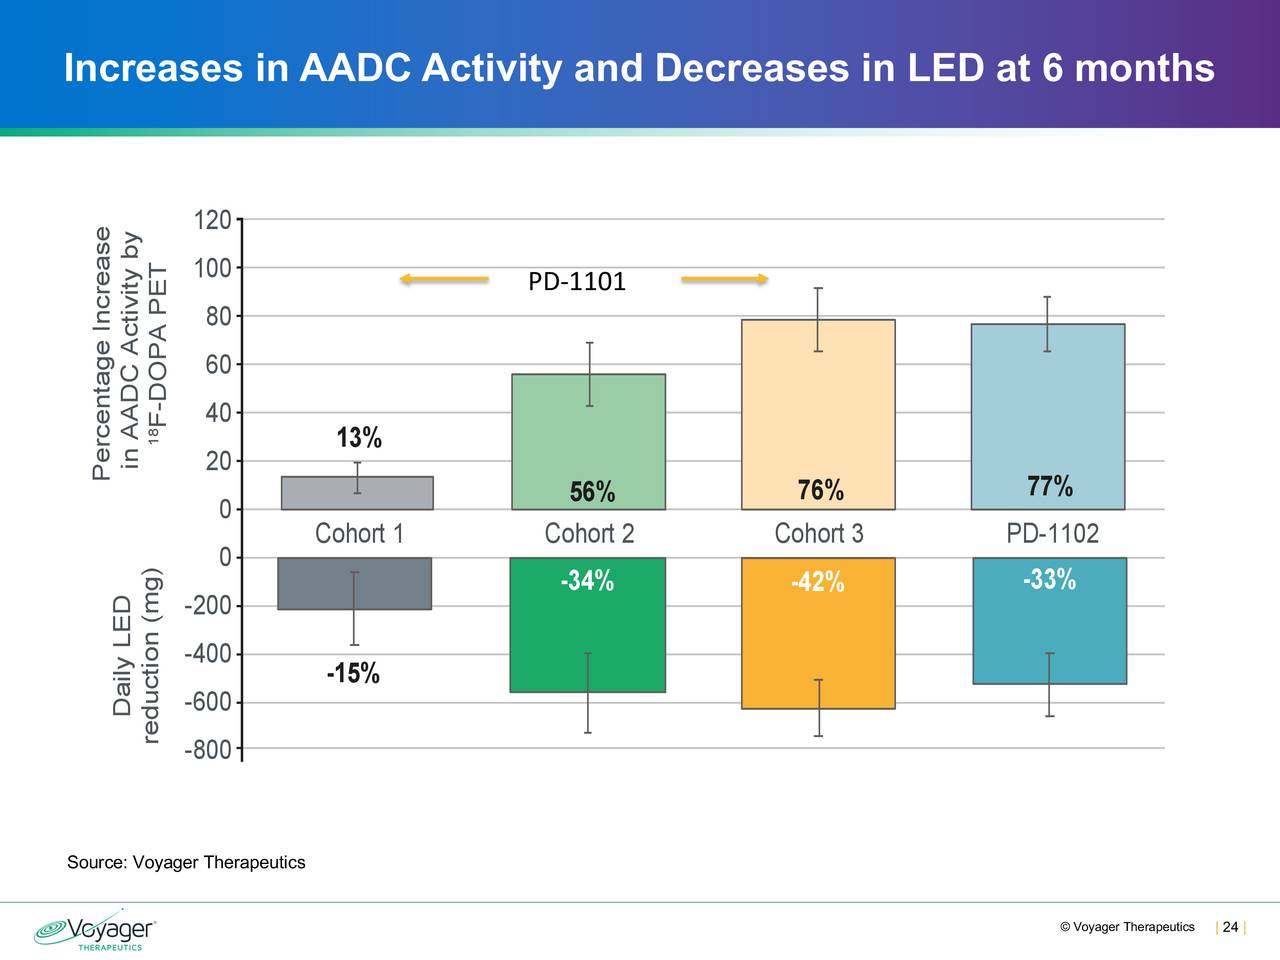 Increases in AADC Activity and Decreases in LED at 6 months